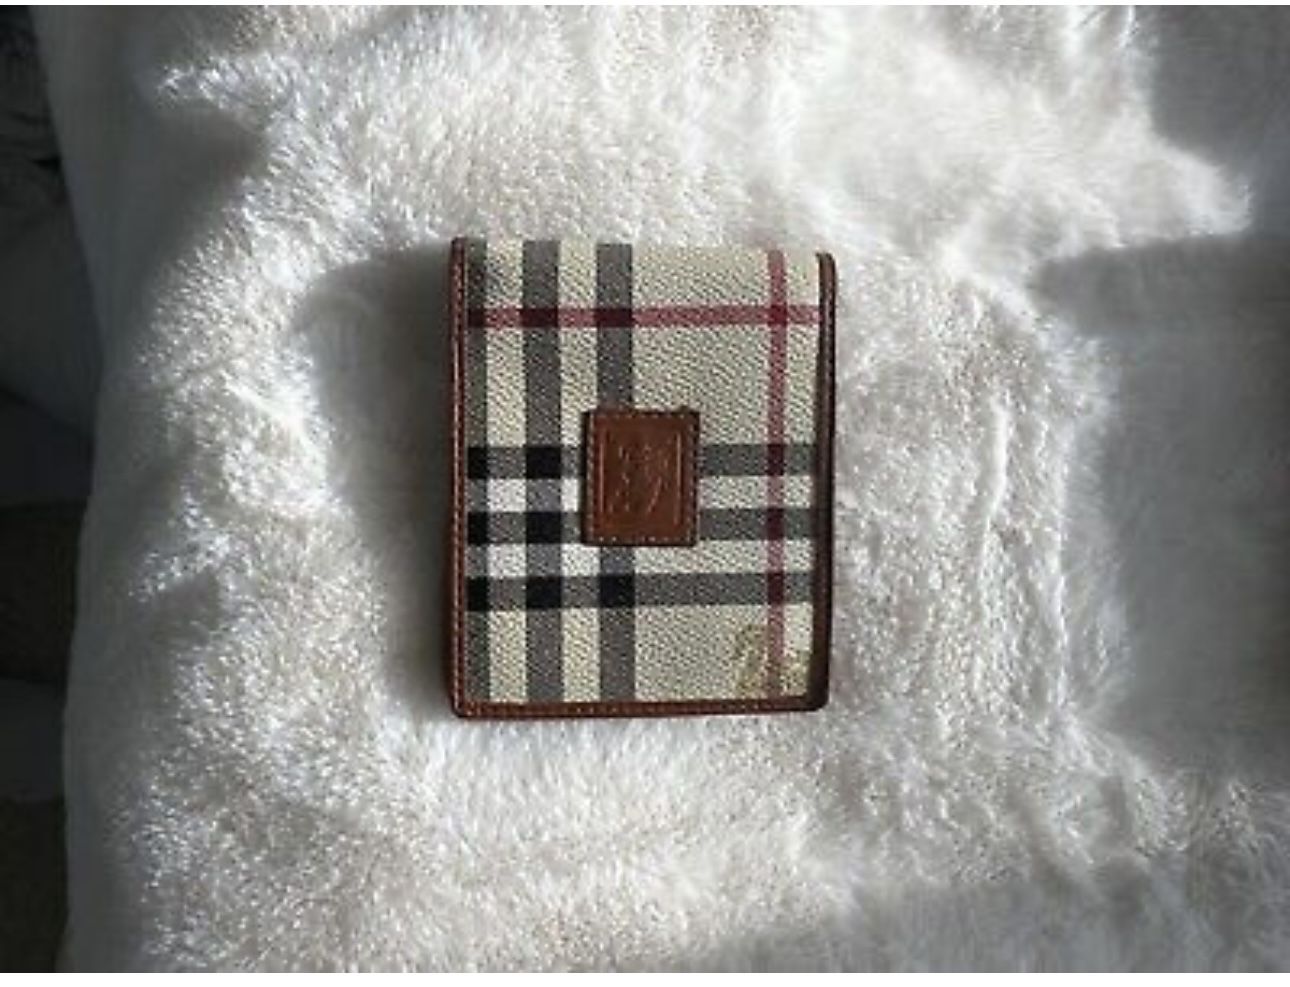 Shop Original Burberry Wallet with great discounts and prices